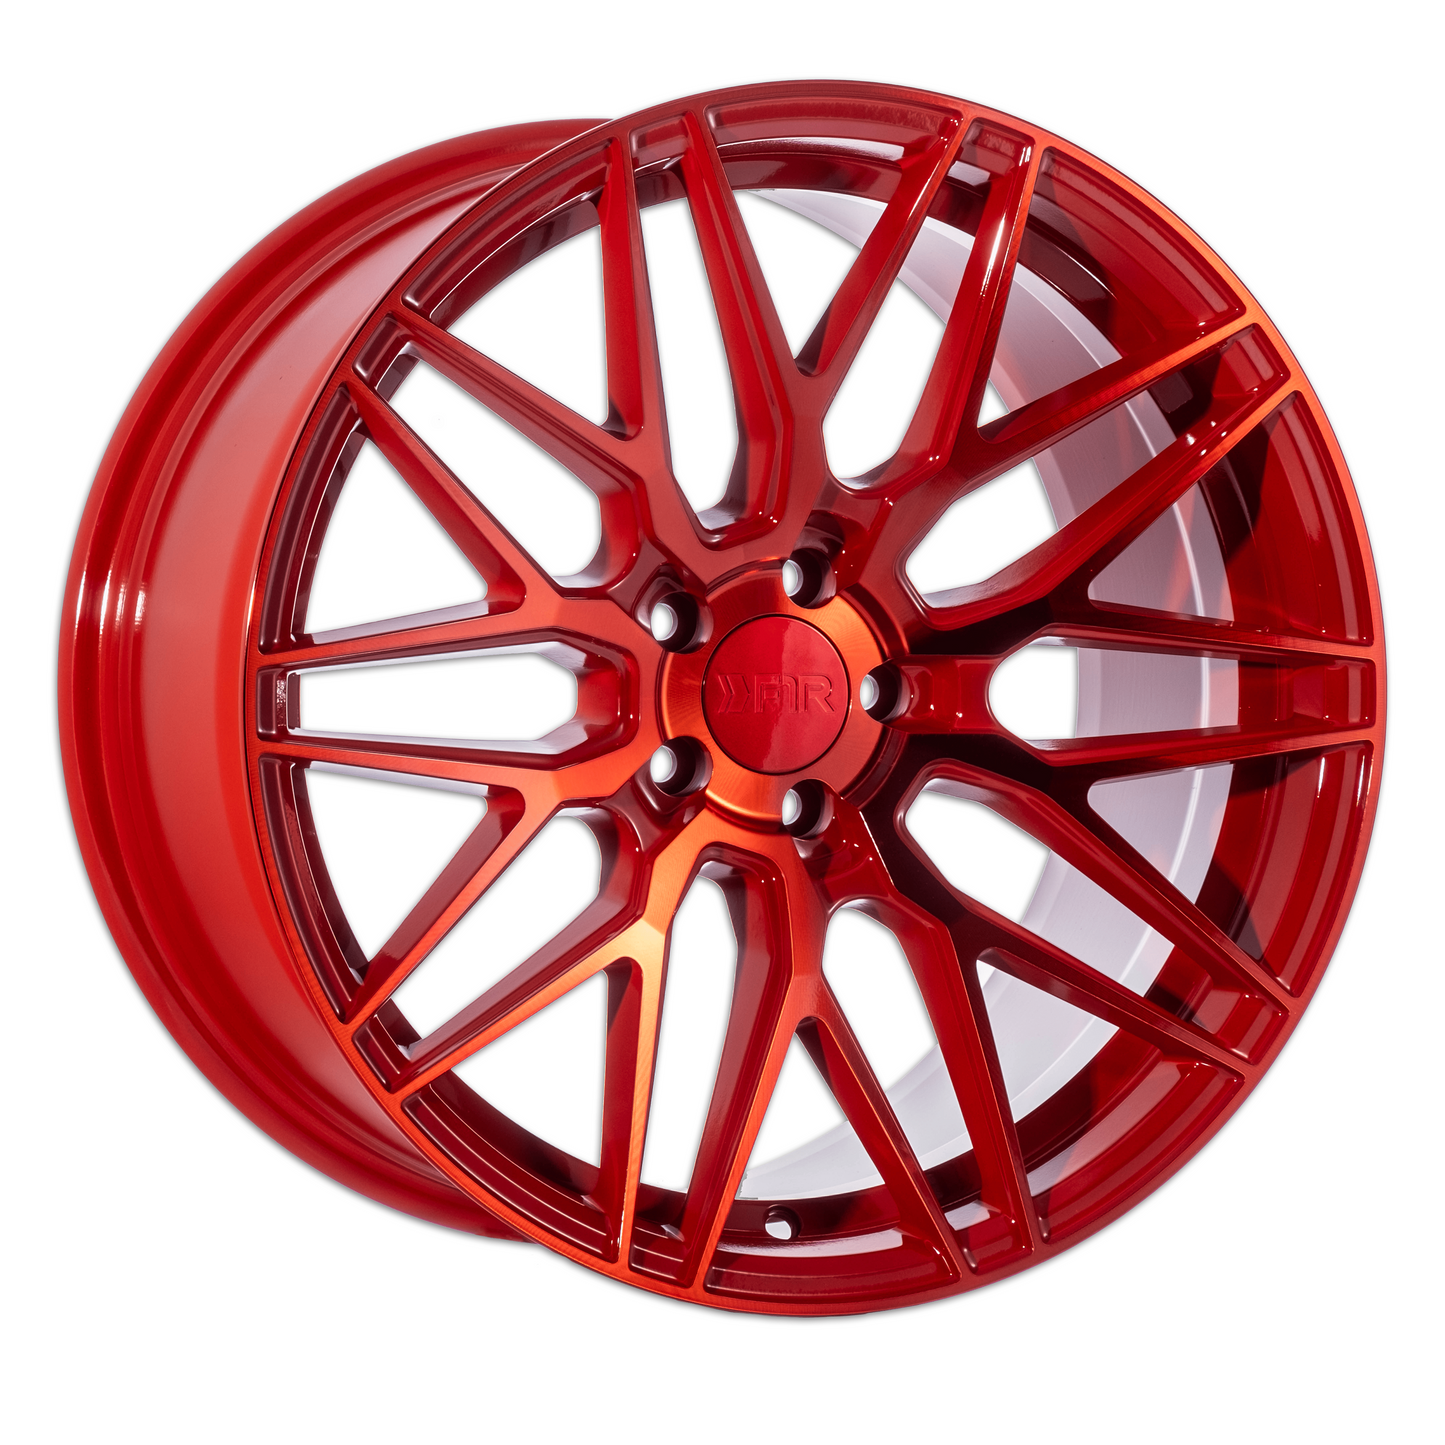 18" F1R F103 Candy Red 5x100 ( Staggered Setup )